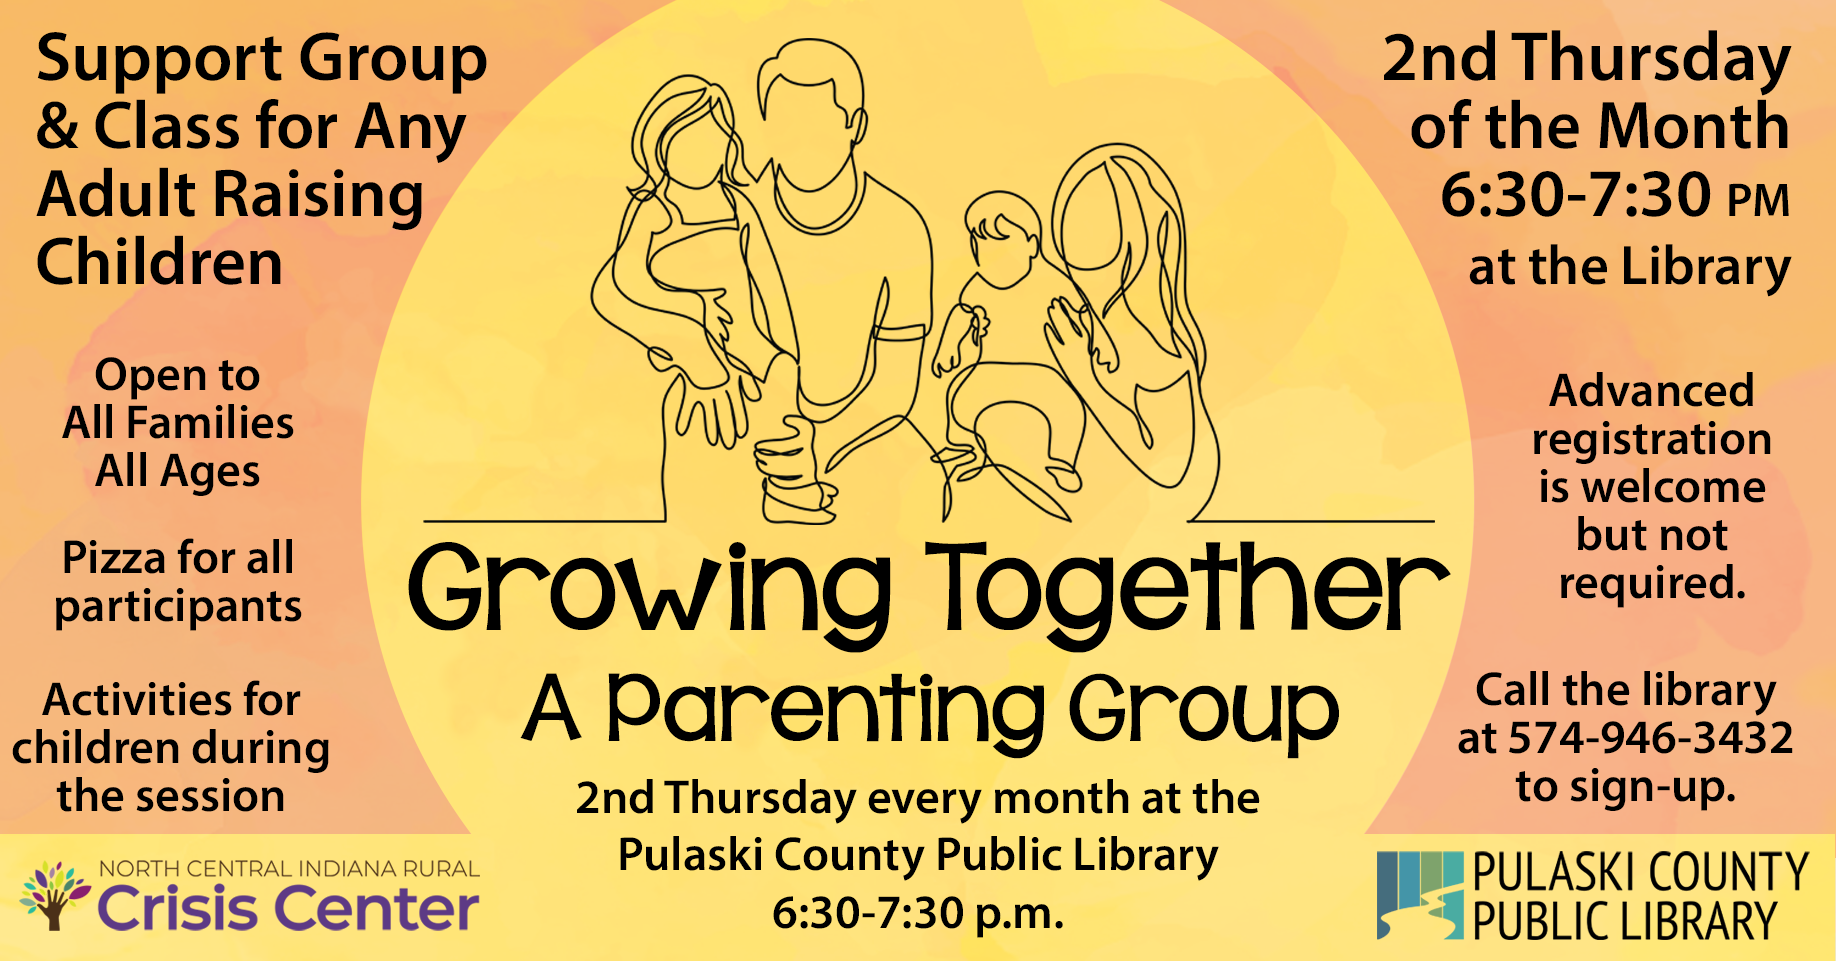 Growing Together: Line drawing of parents holding their young children alongside information about the program.